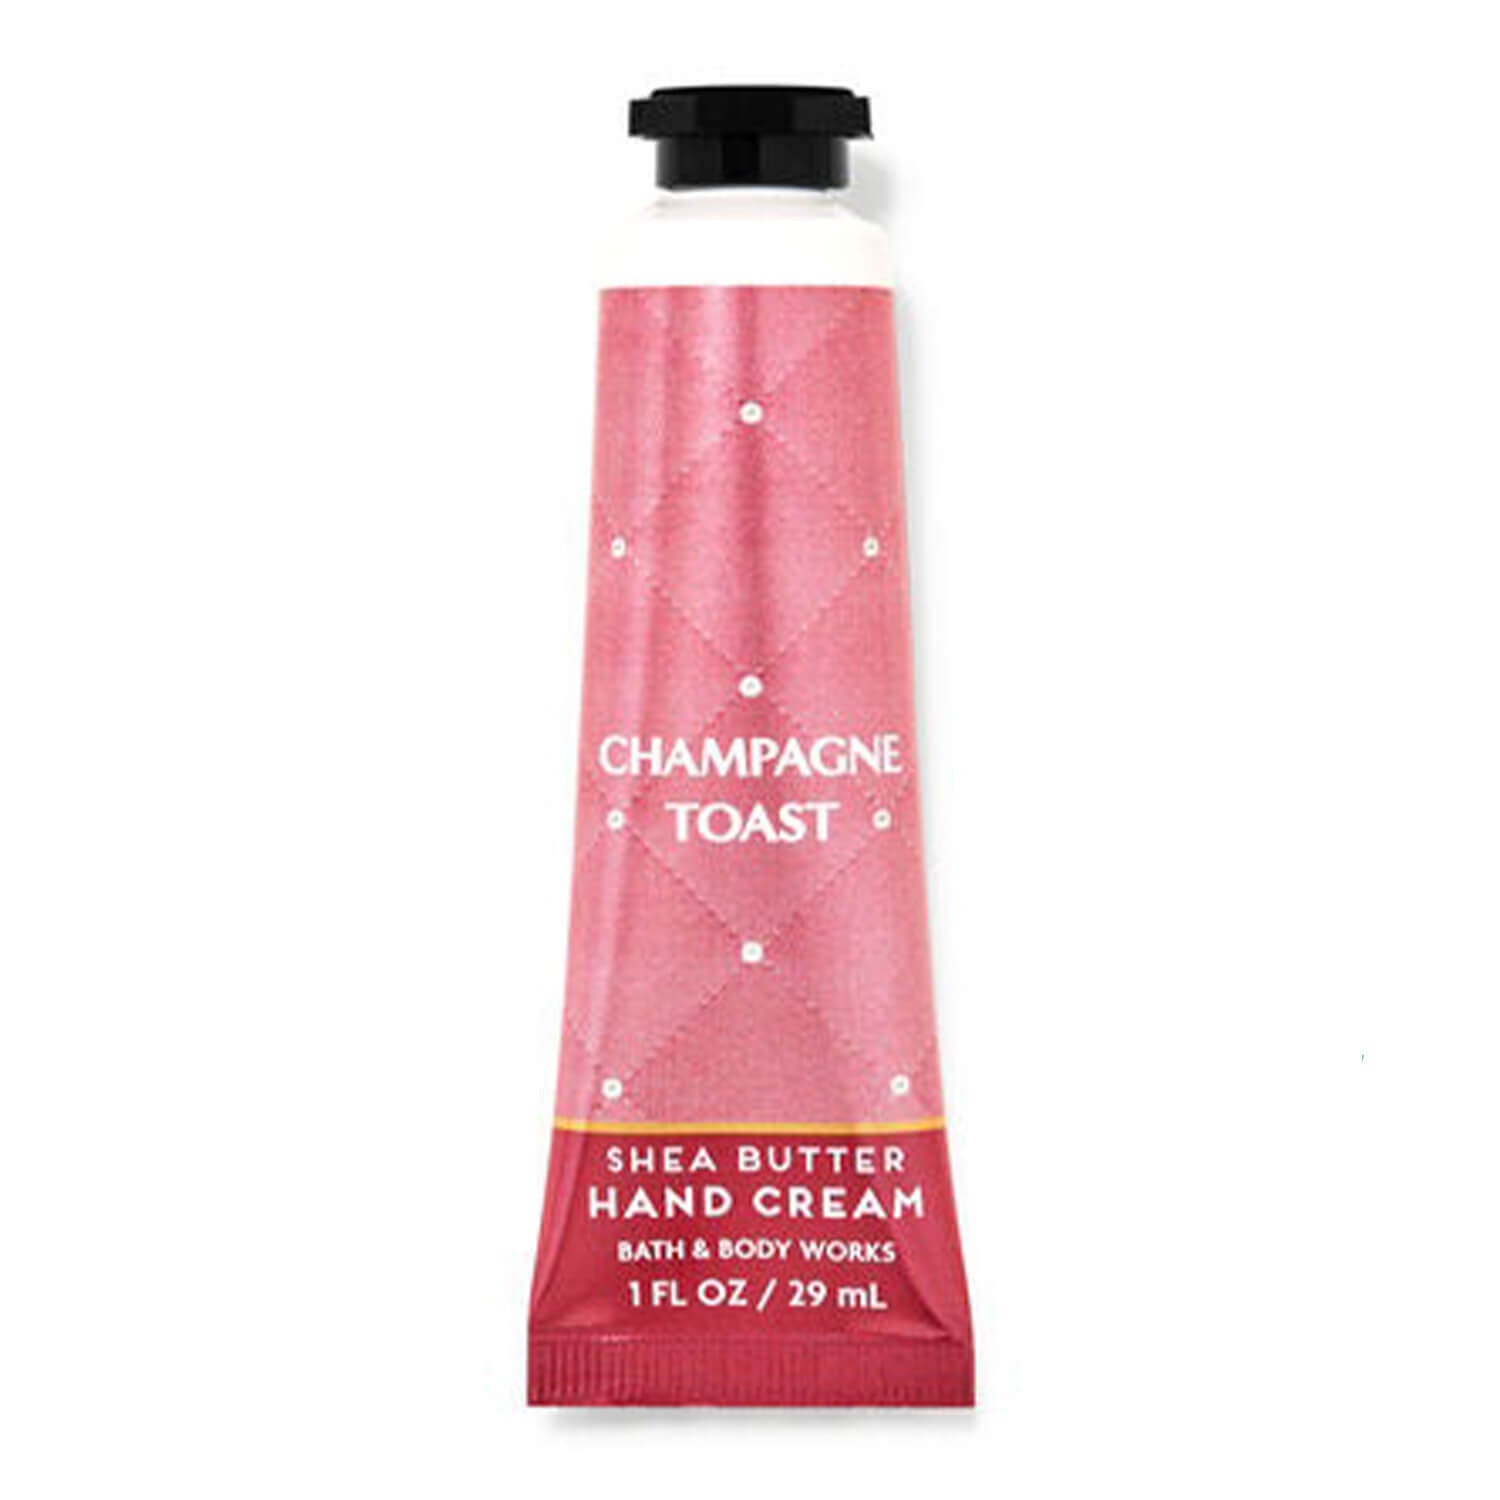 Shop bath and body works hand cream in champagne toast available at Heygirl.pk for delivery in Pakistan